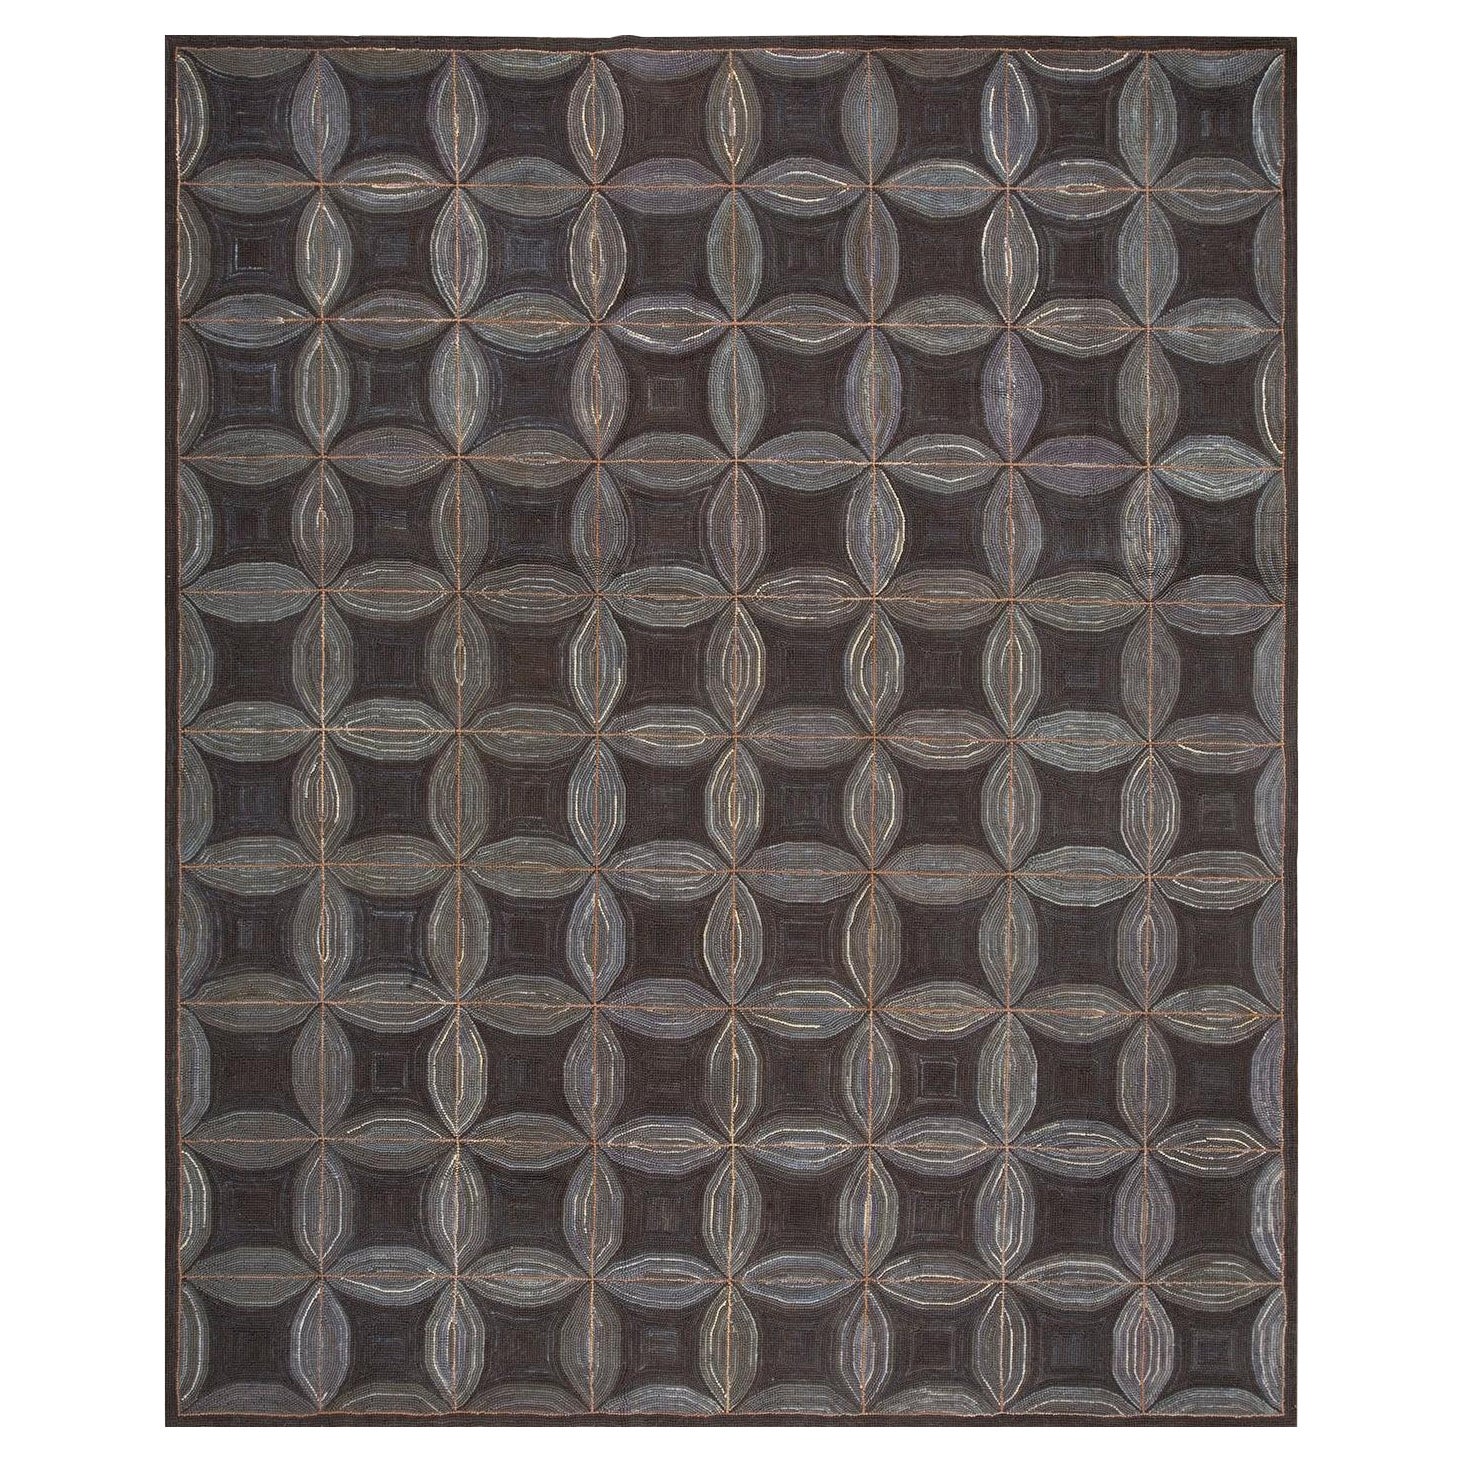 Contemporary American Hooked Rug 6' 0" x 9' 0" (183 x 274 cm) For Sale